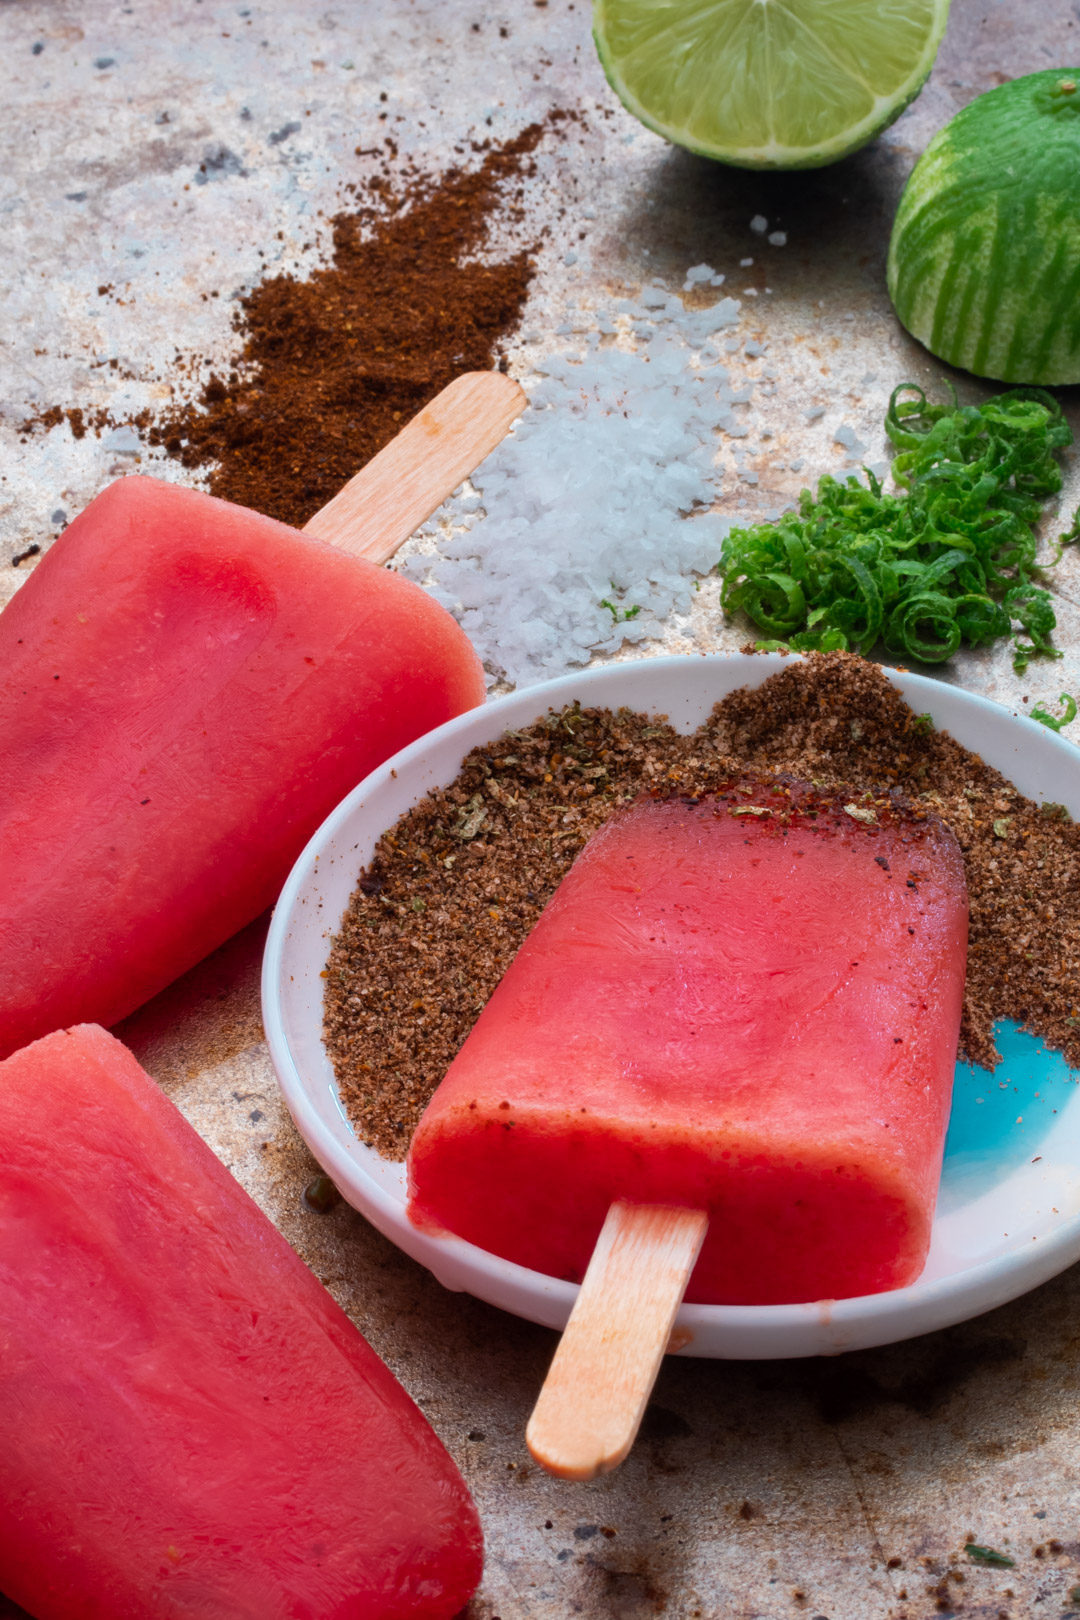 Watermelon paletas with chili-lime salt: from 45 degrees